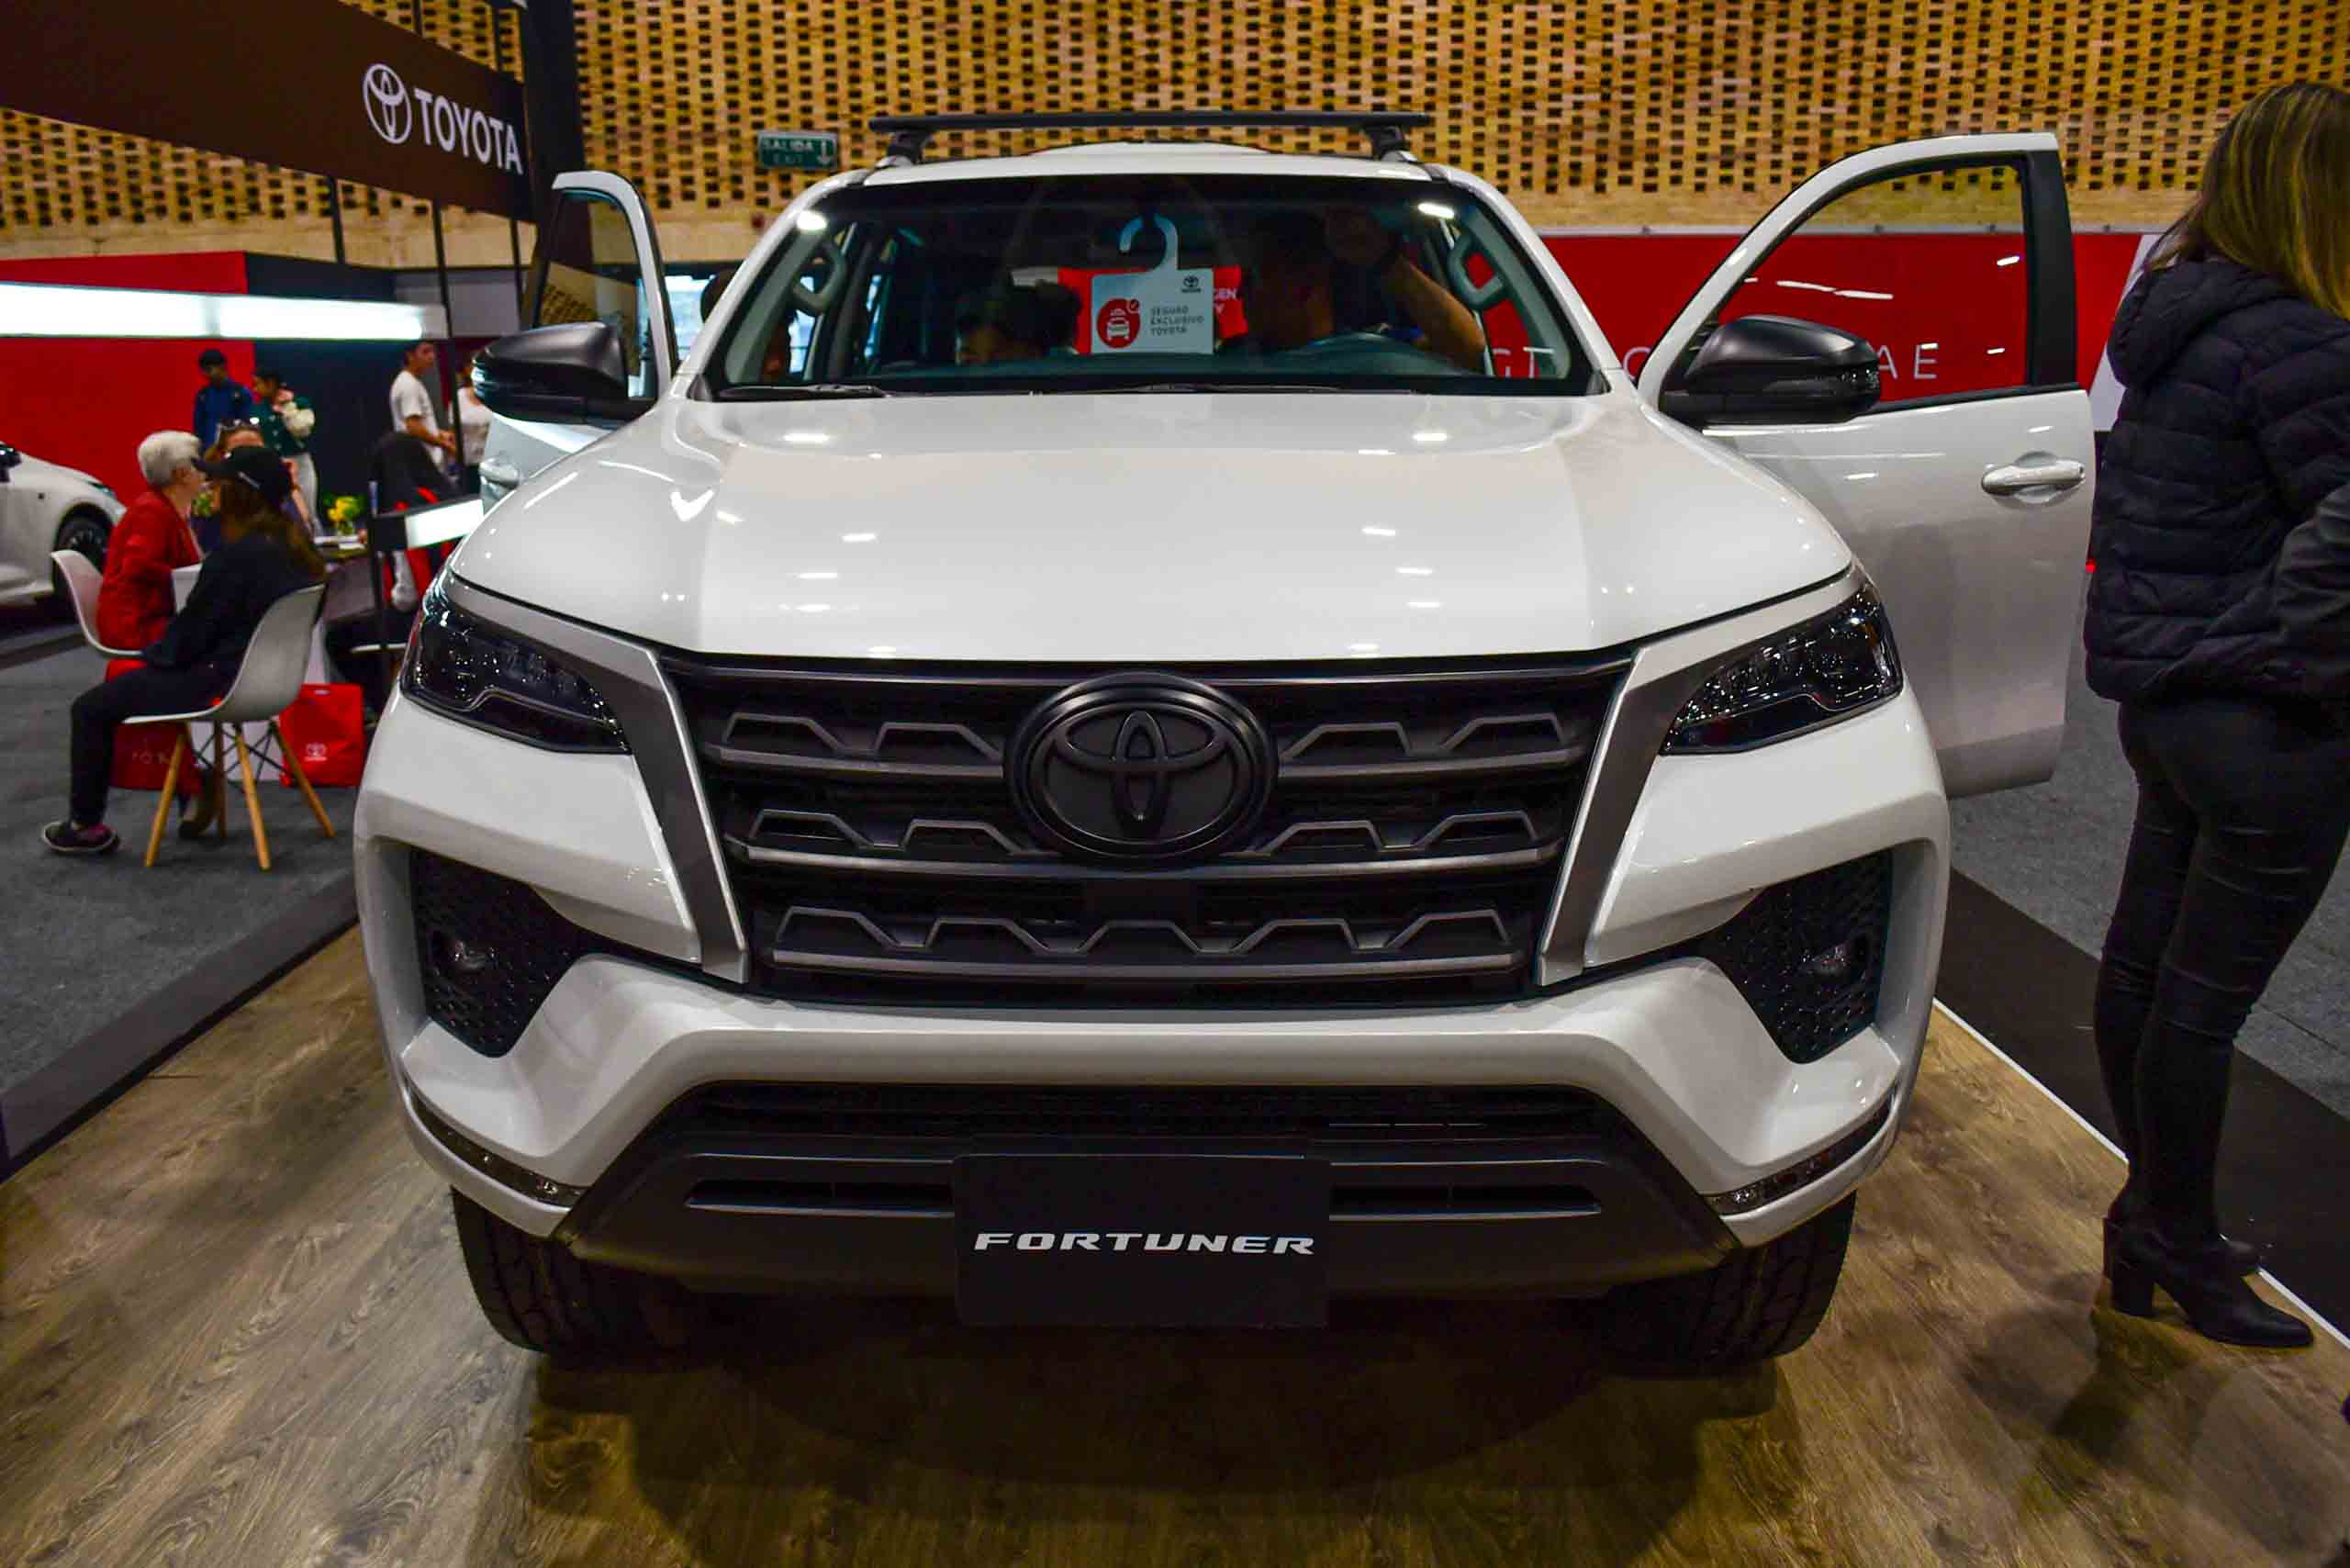 Toyota-Fortuner-Black-Edition-Colombia